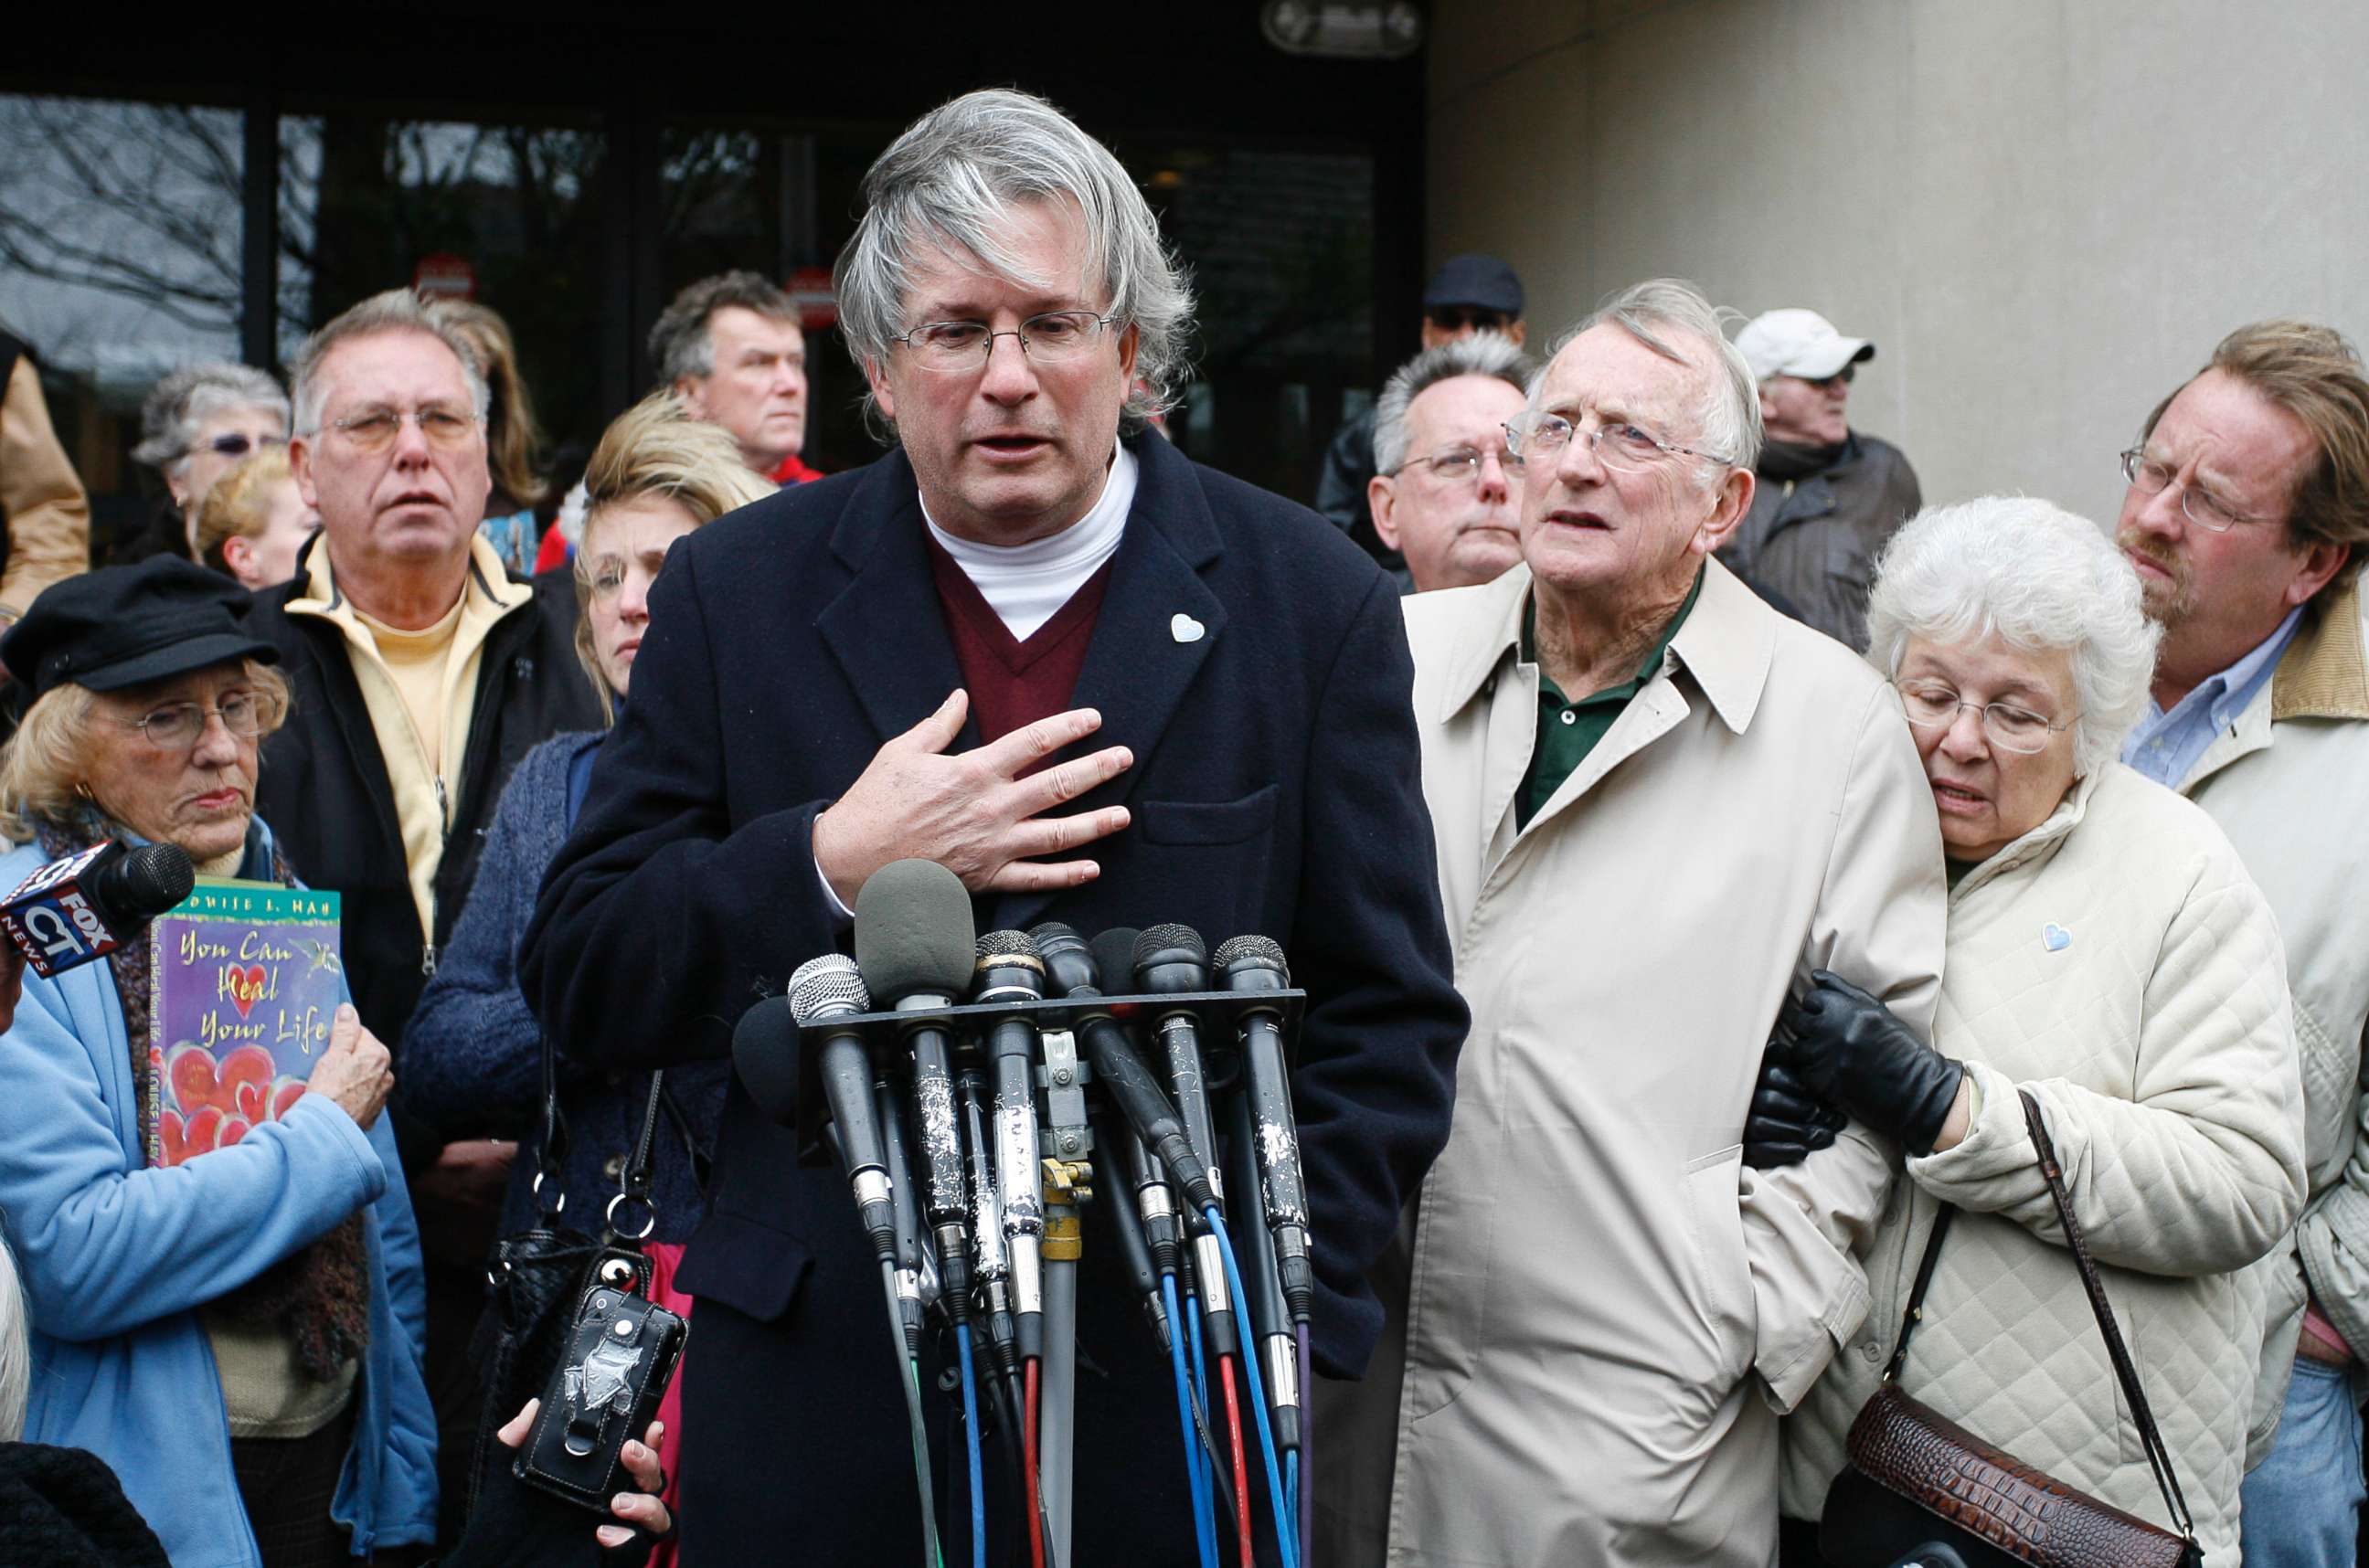 PHOTO: Dr. William A. Petit Jr., center, surrounded by members of the  the Petit and Hawke family, reacts to the sentence given to Steven Hayes, not pictured, following jury deliberations Monday, Nov. 8, 2010, at the New Haven, Conn., County Courthouse.